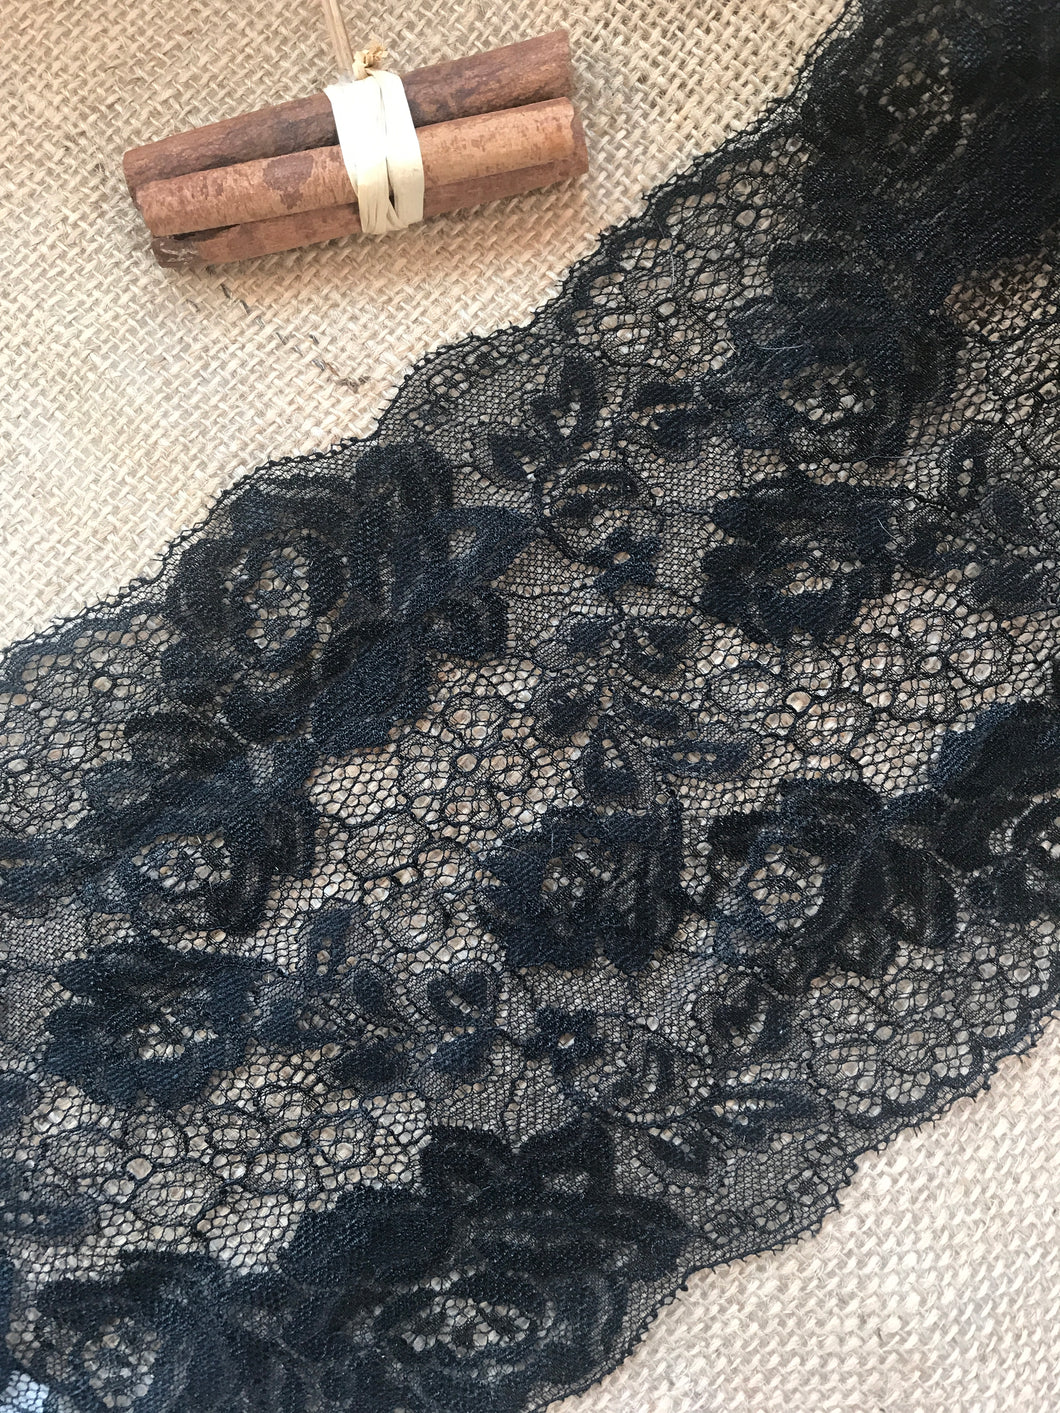 Beautiful Black Delicate French Rose Lace 17cm/6.75